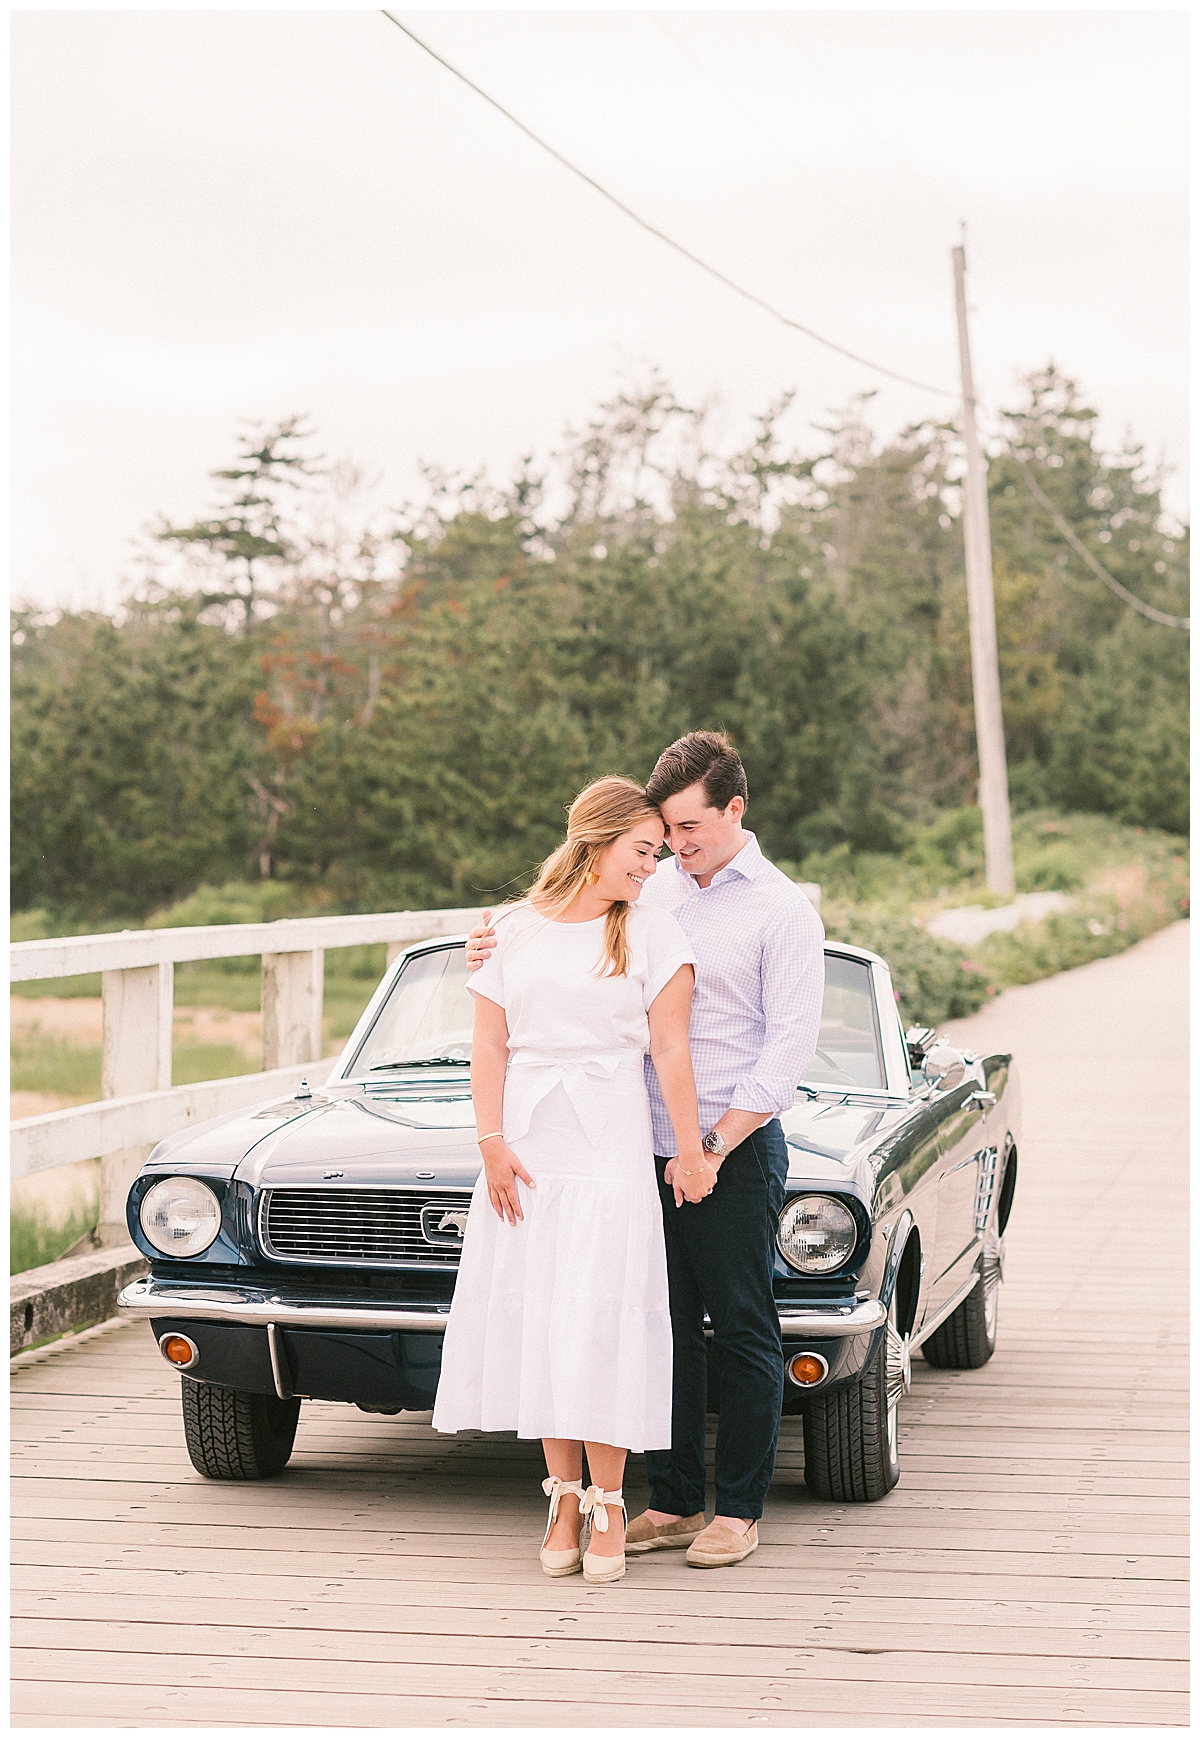 Rose and Ollie's Nantucket Engagement photos in Madaket